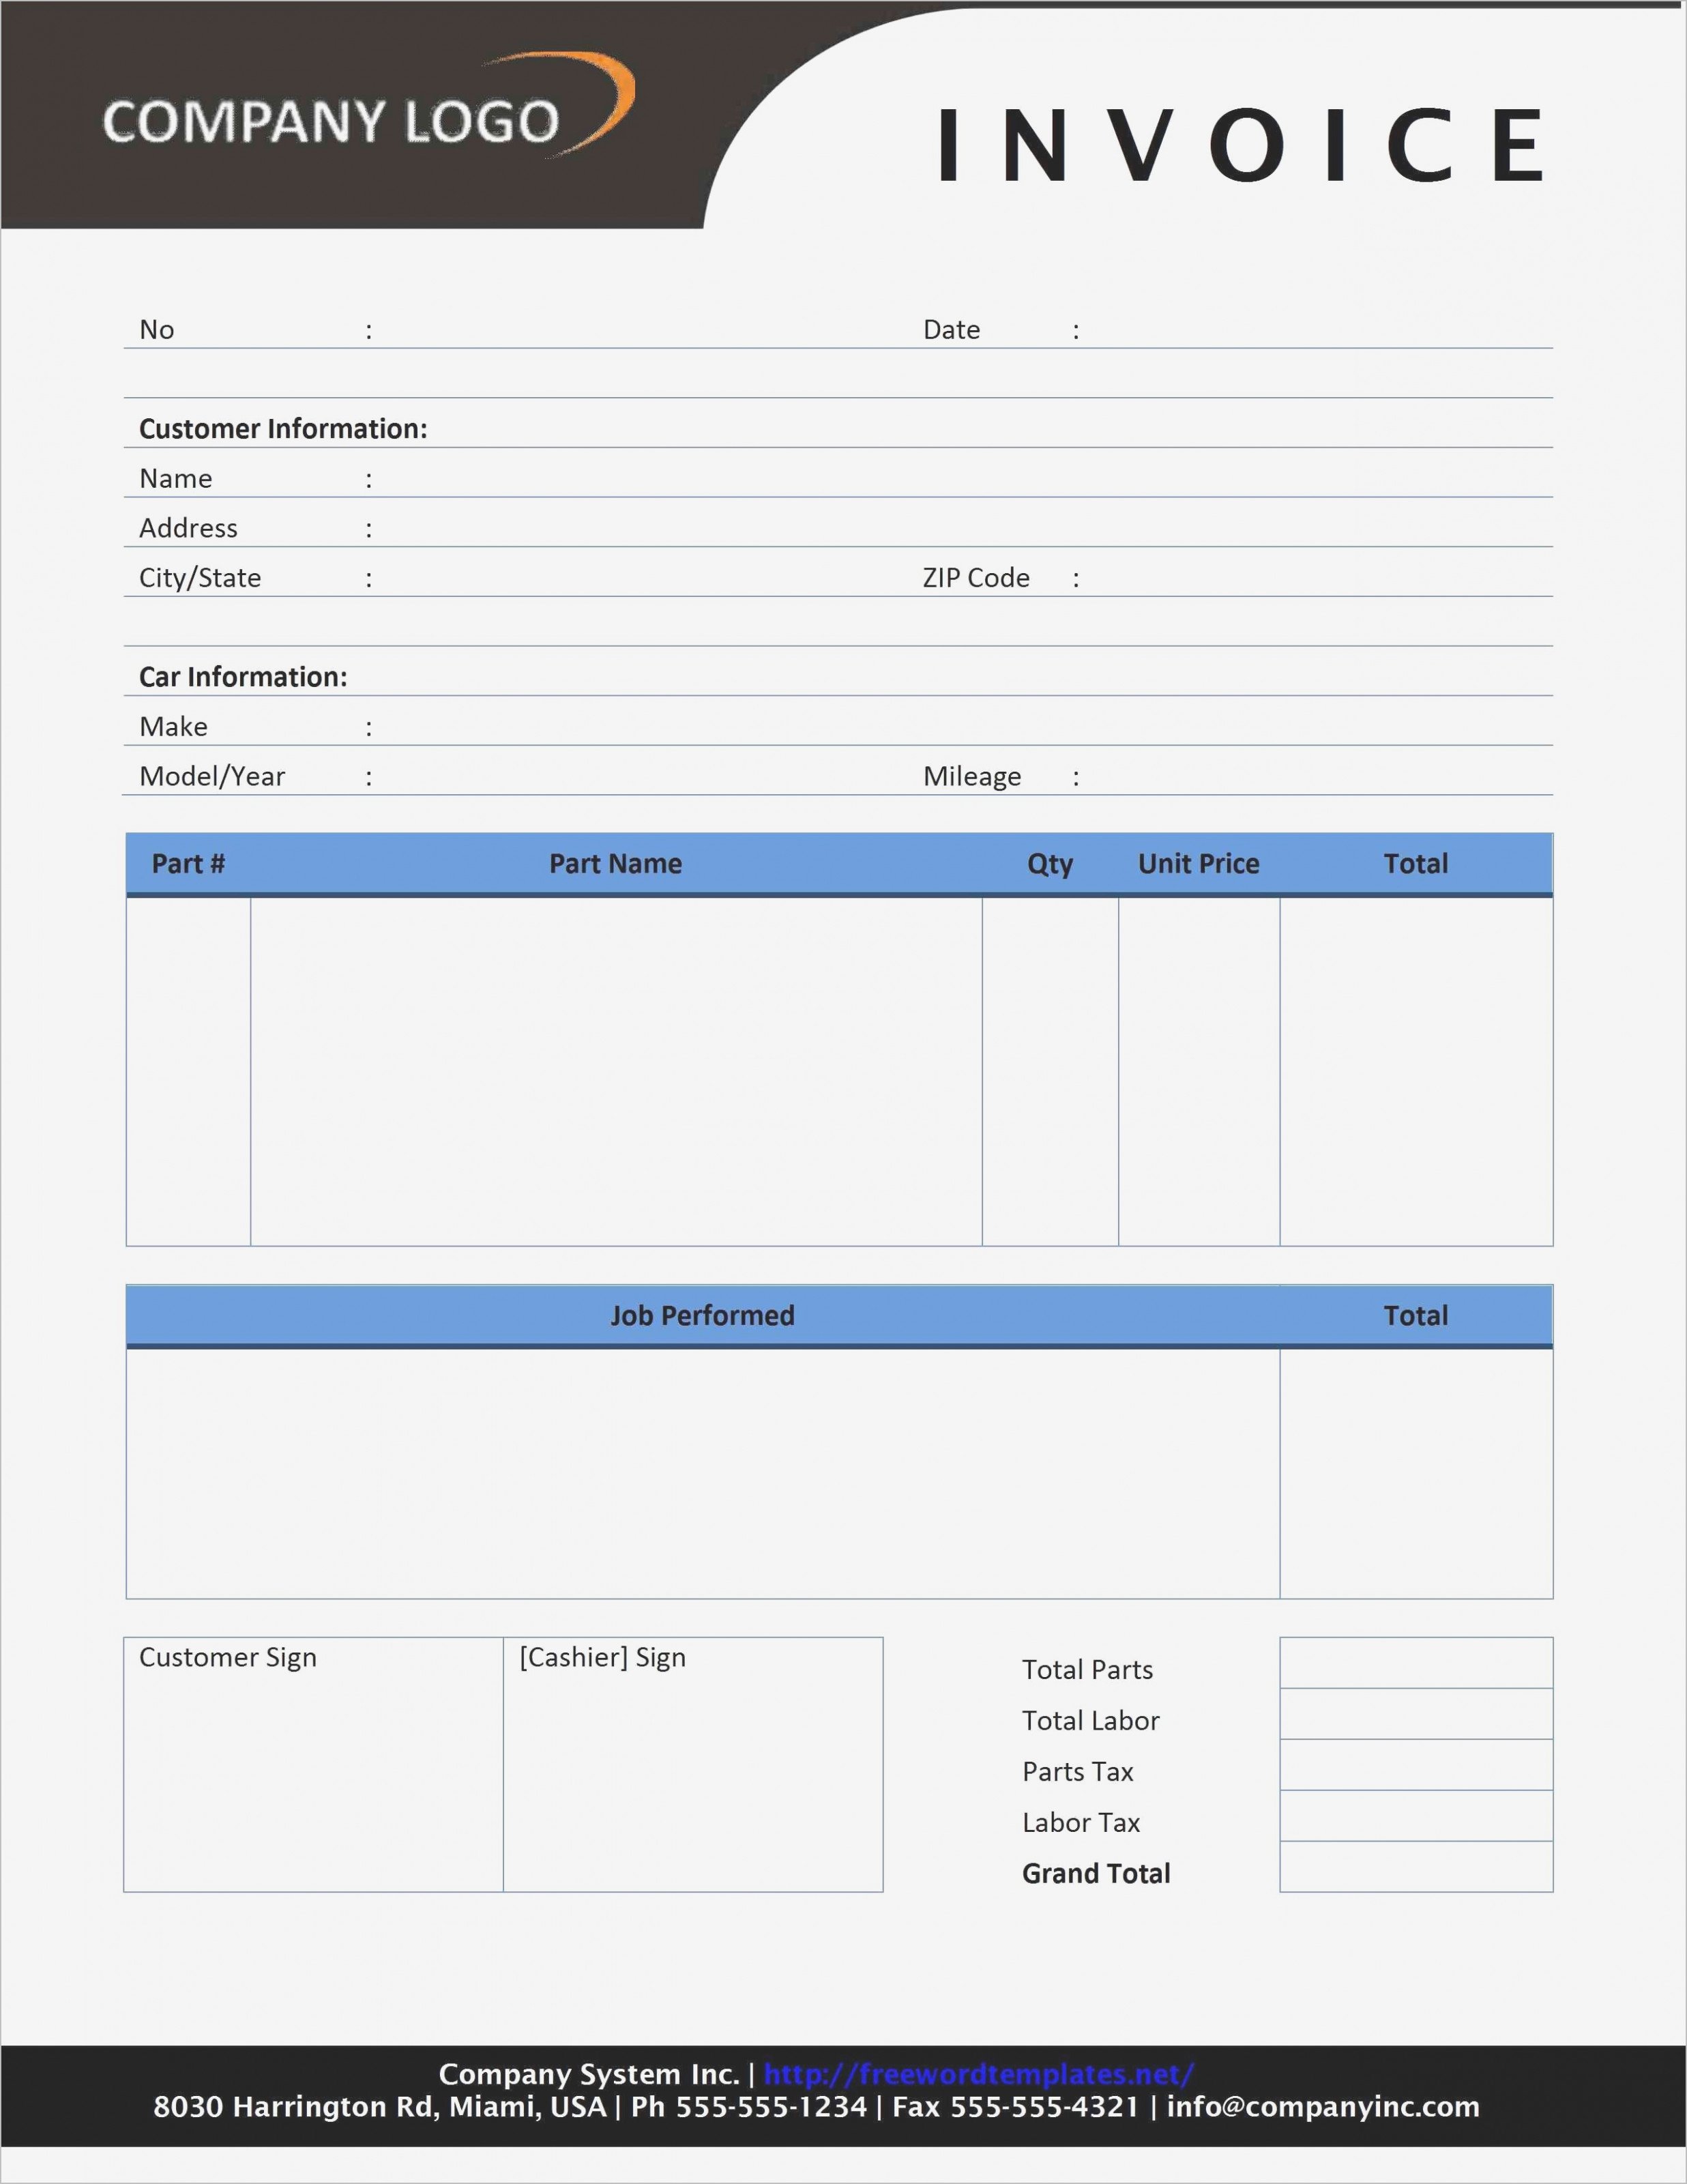 Independent Contractor Invoice Template Excel Awesome 14 Stereotypes About